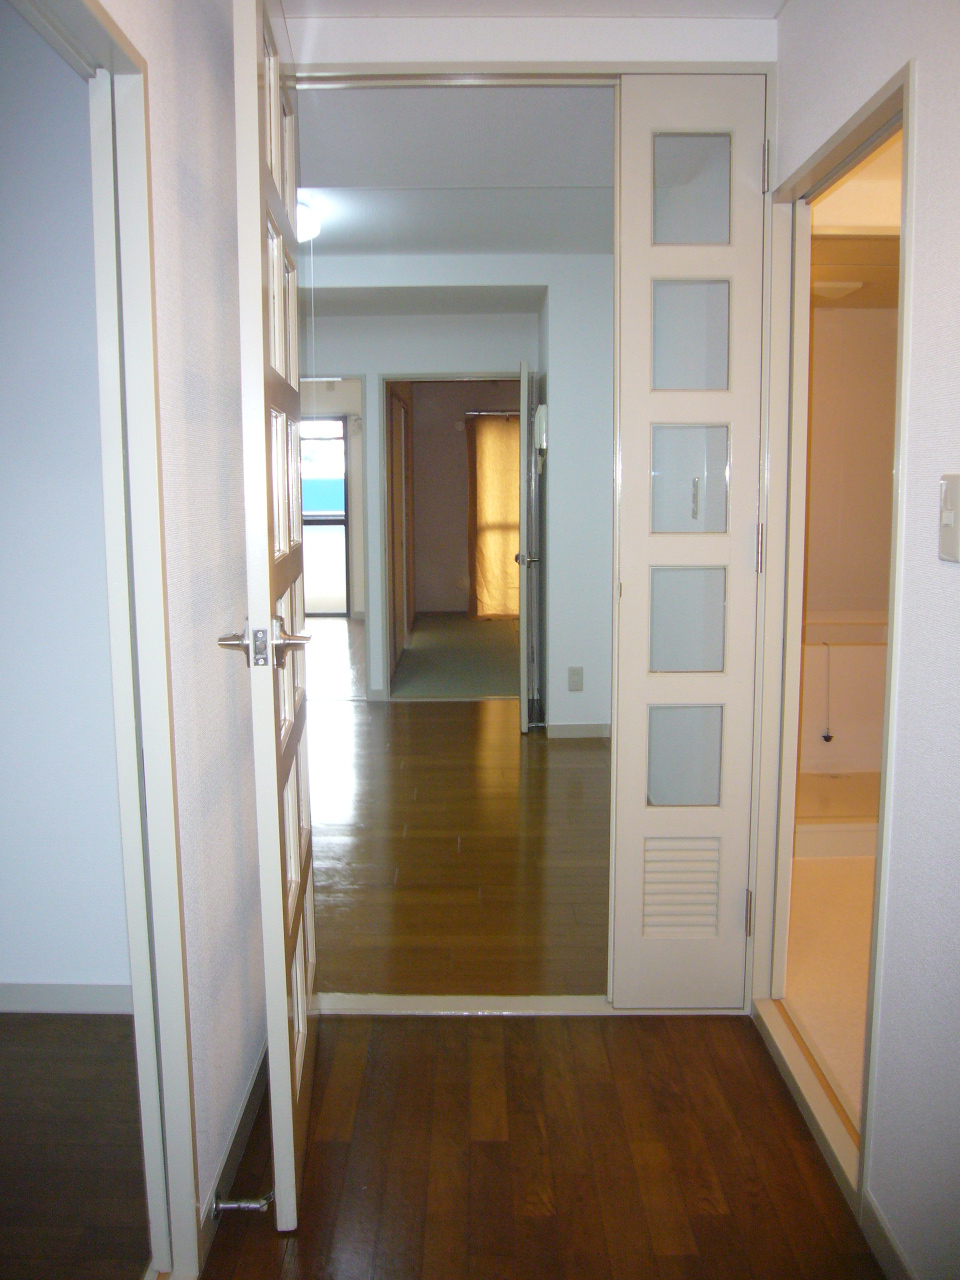 Entrance. Other Room No. ☆ It is with the corridor